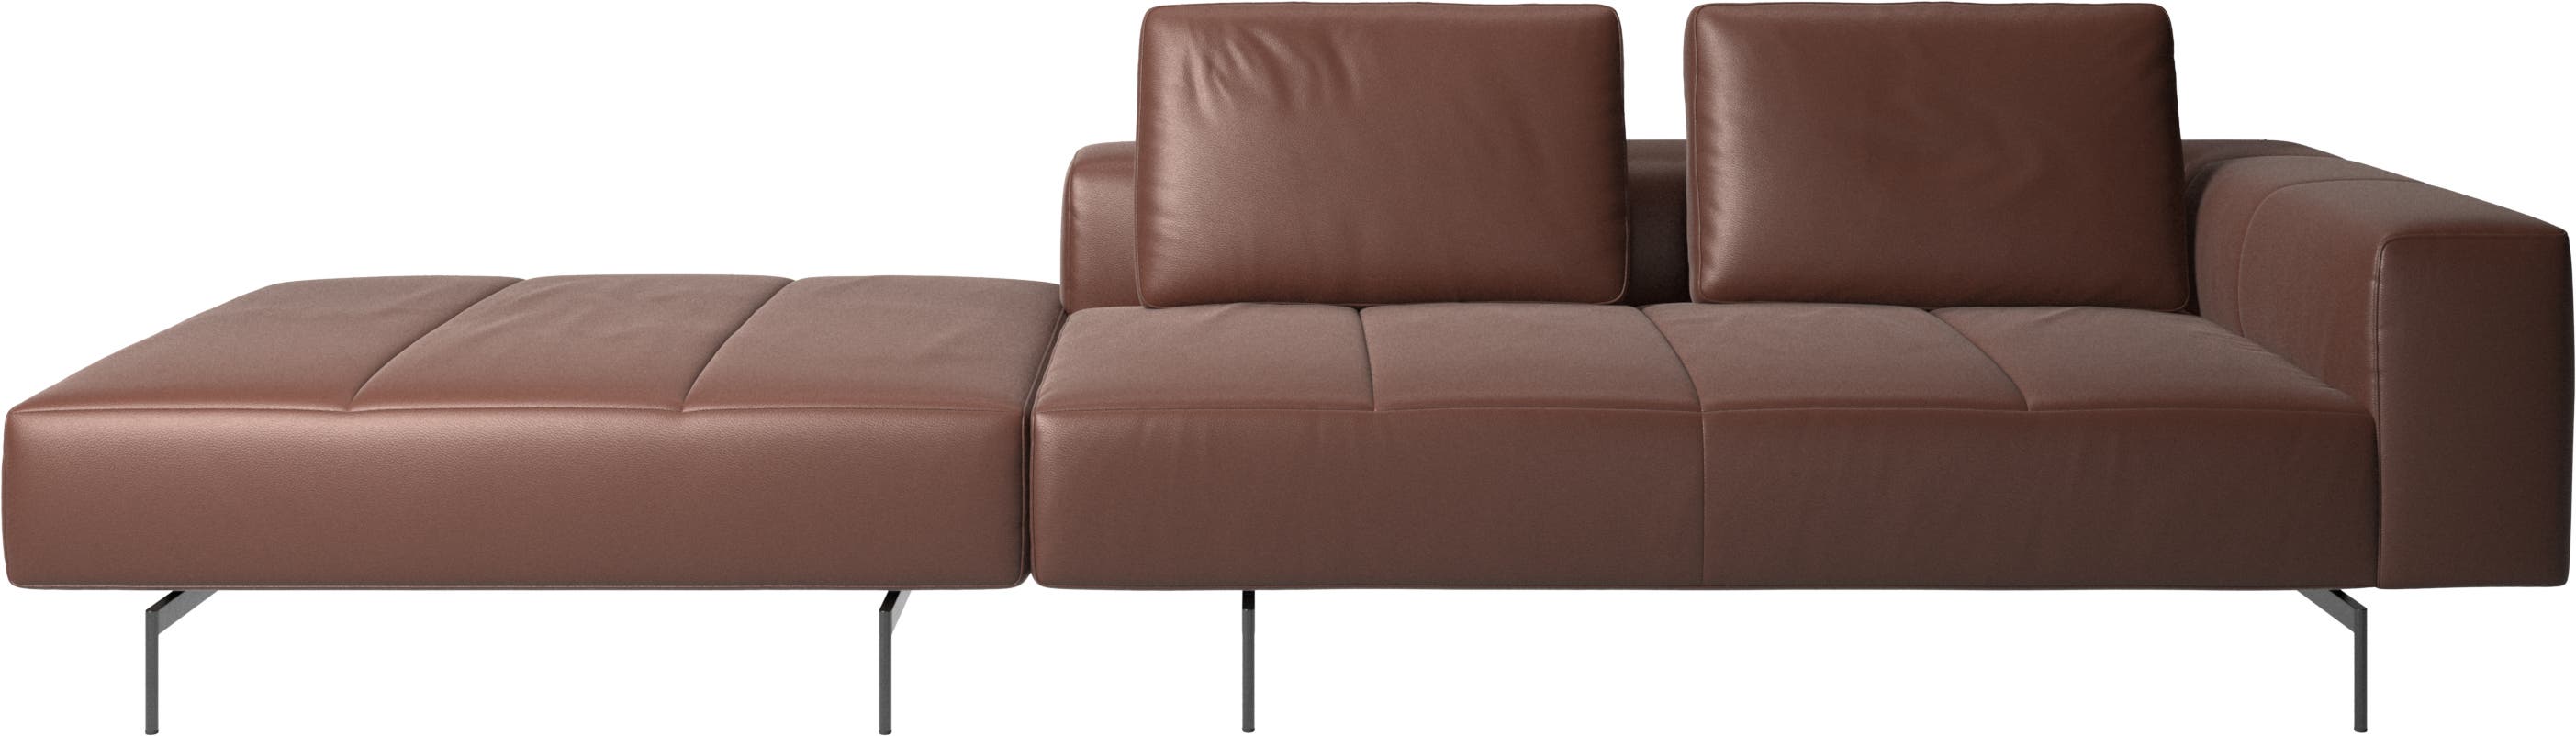 Amsterdam sofa with footstool on left side